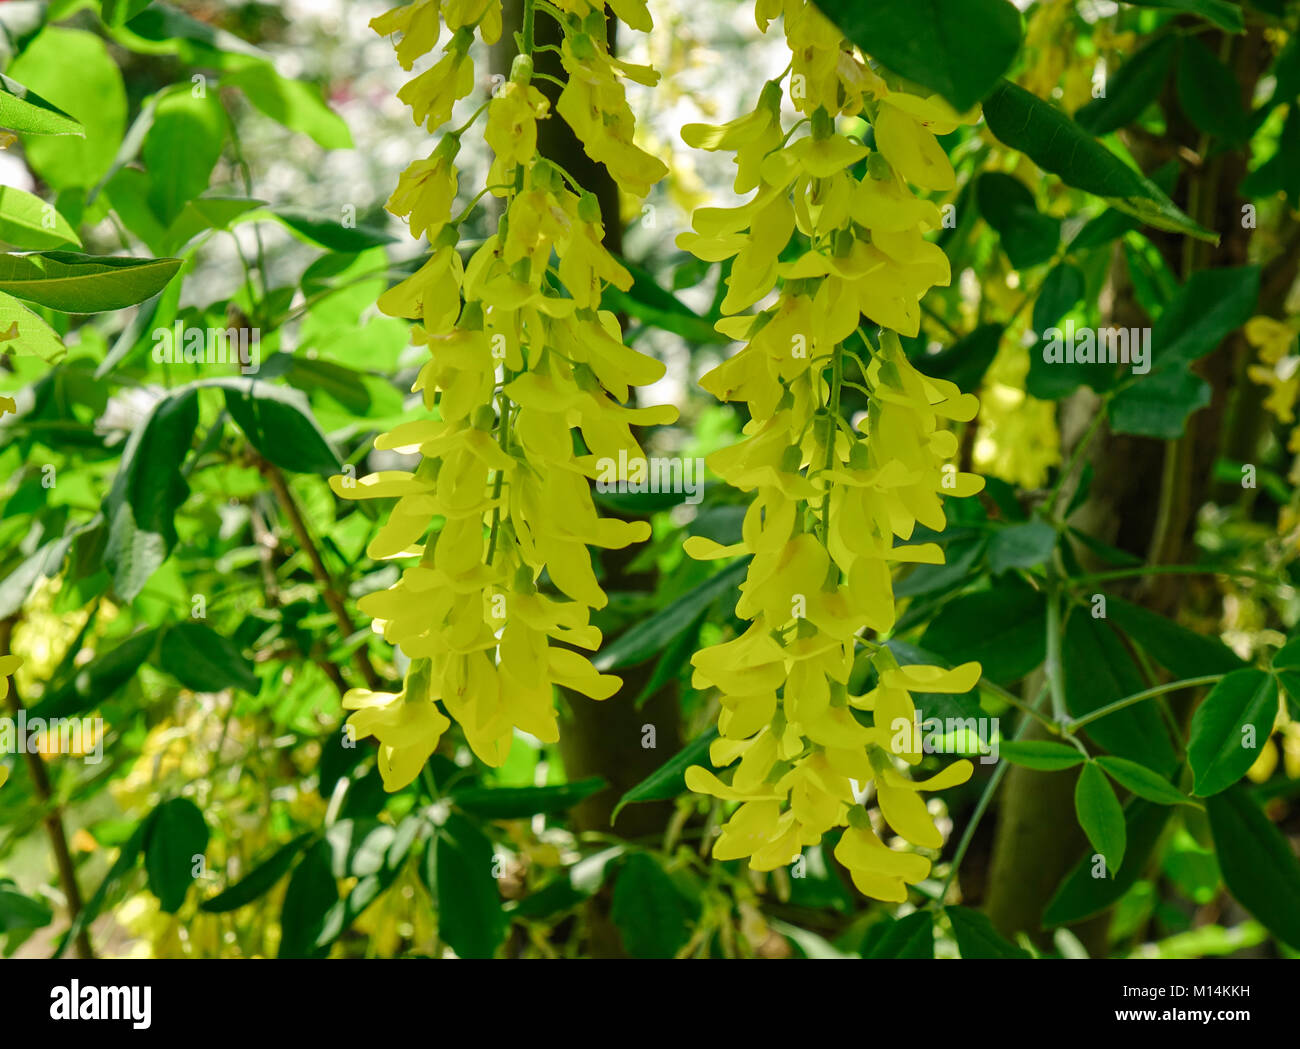 Cassia fistula (Golden shower) flowers blooming at botanic garden in spring time. Stock Photo